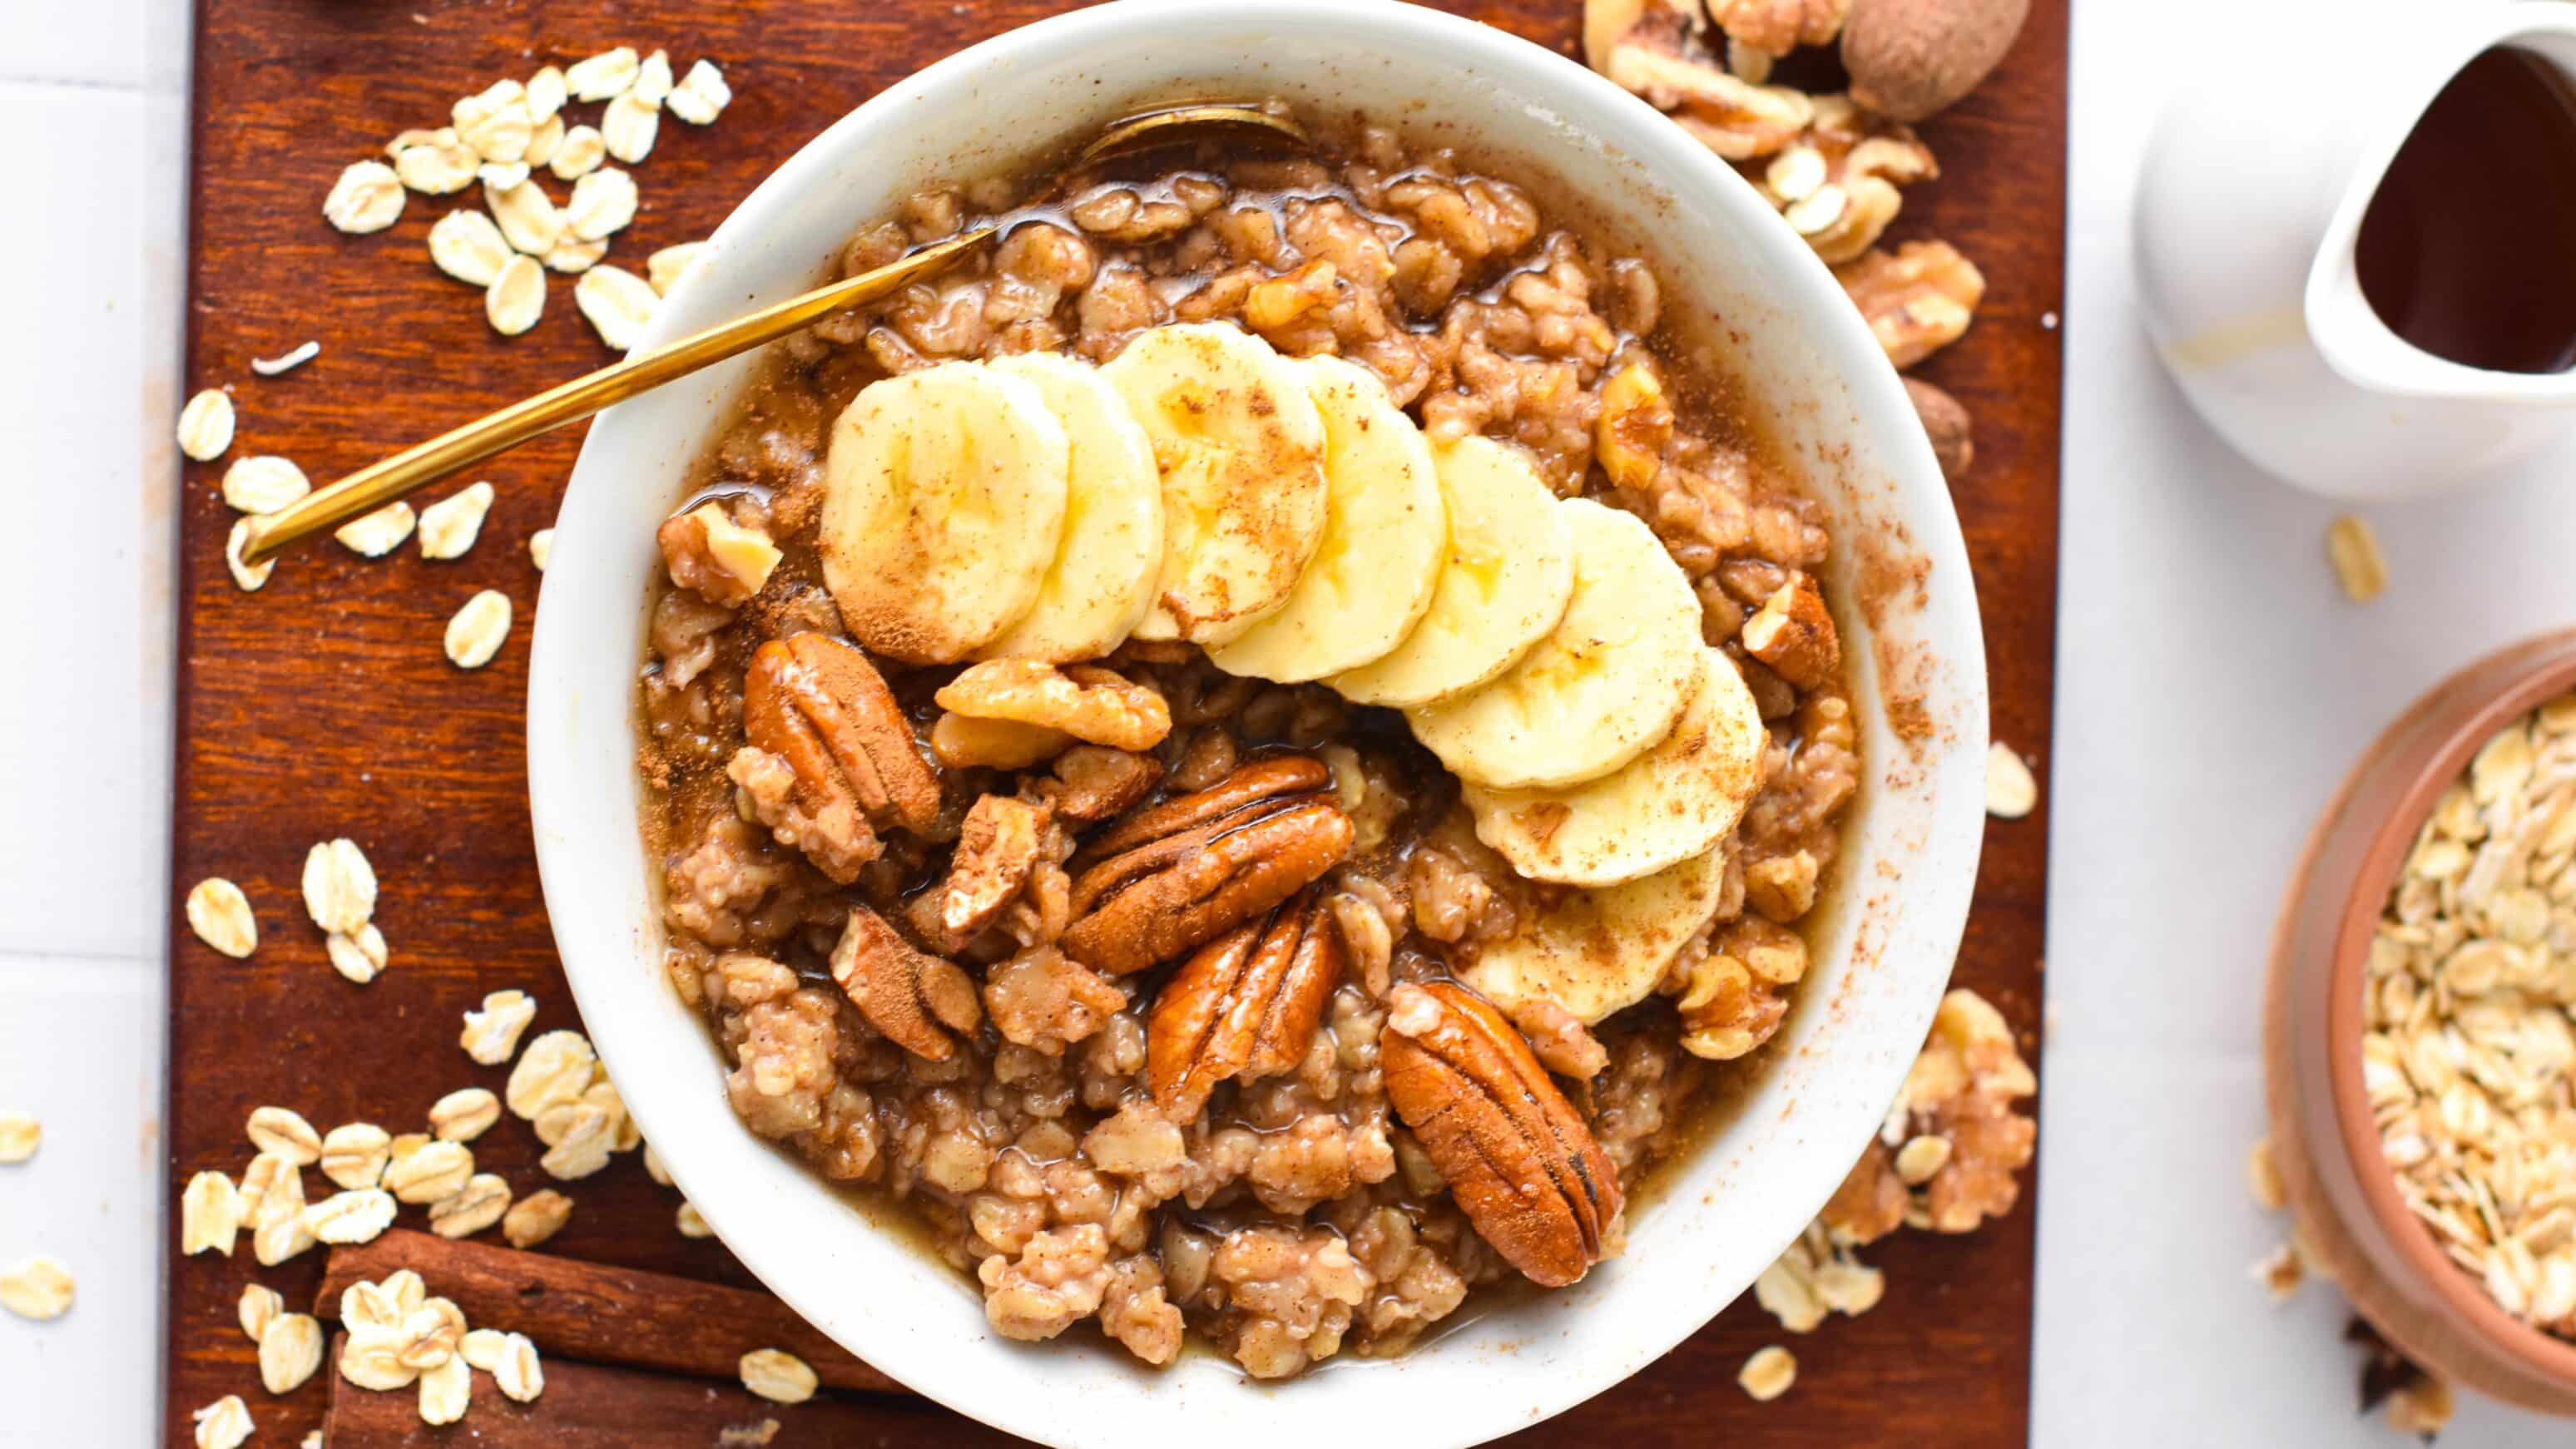 A bowl of cinnamon oatmeal from the top with banana slices, pecans and walnuts.